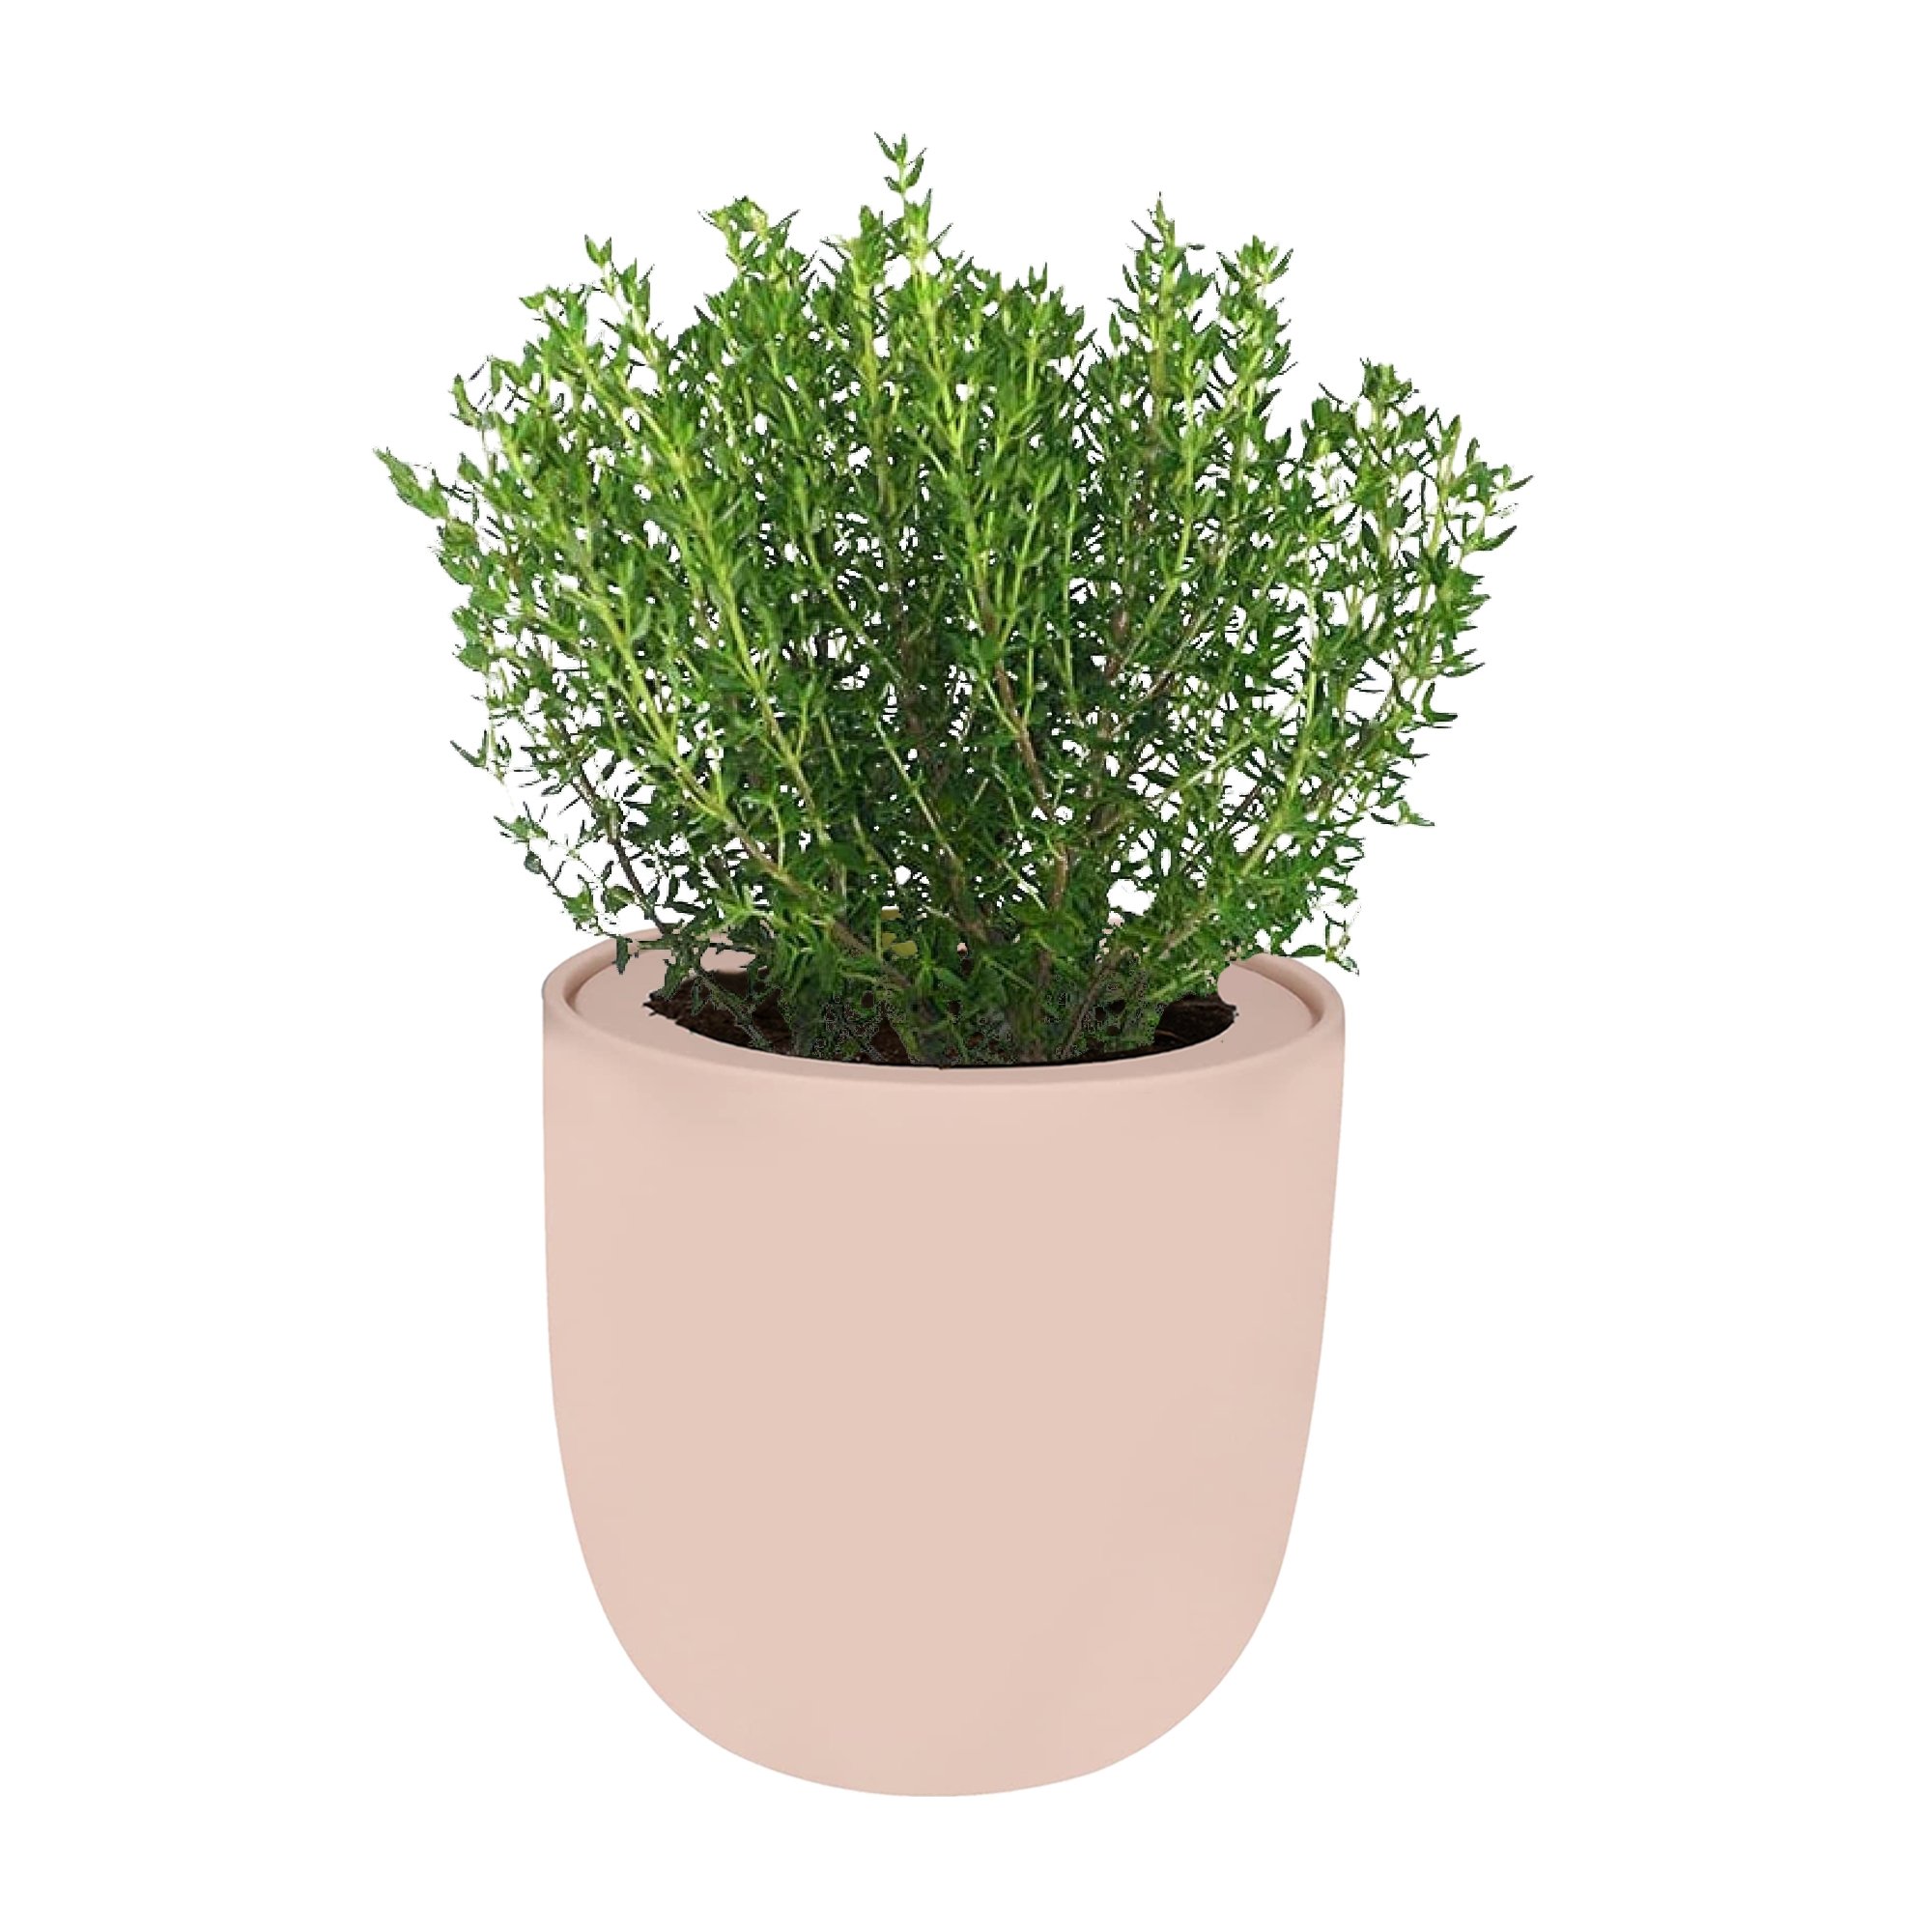 Thyme Pink Ceramic Pot Hydroponic Growing Kit with Seeds